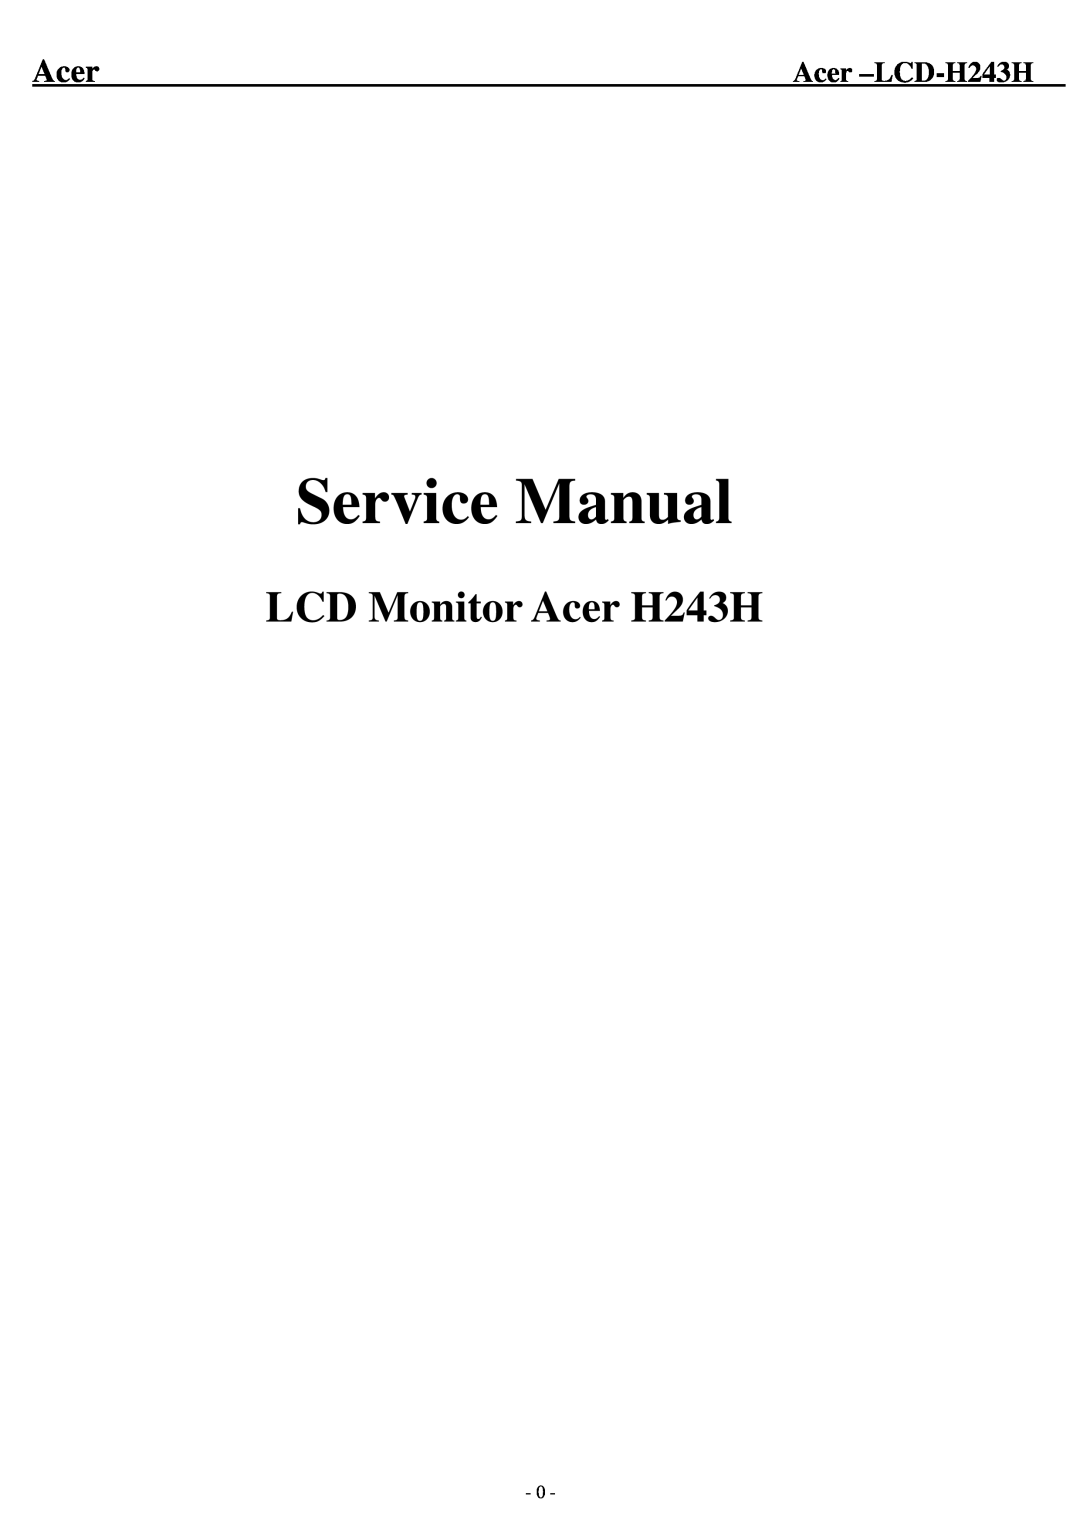 Acer service manual Acer -LCD-H243H, Service Manual, LCD Monitor Acer H243H 